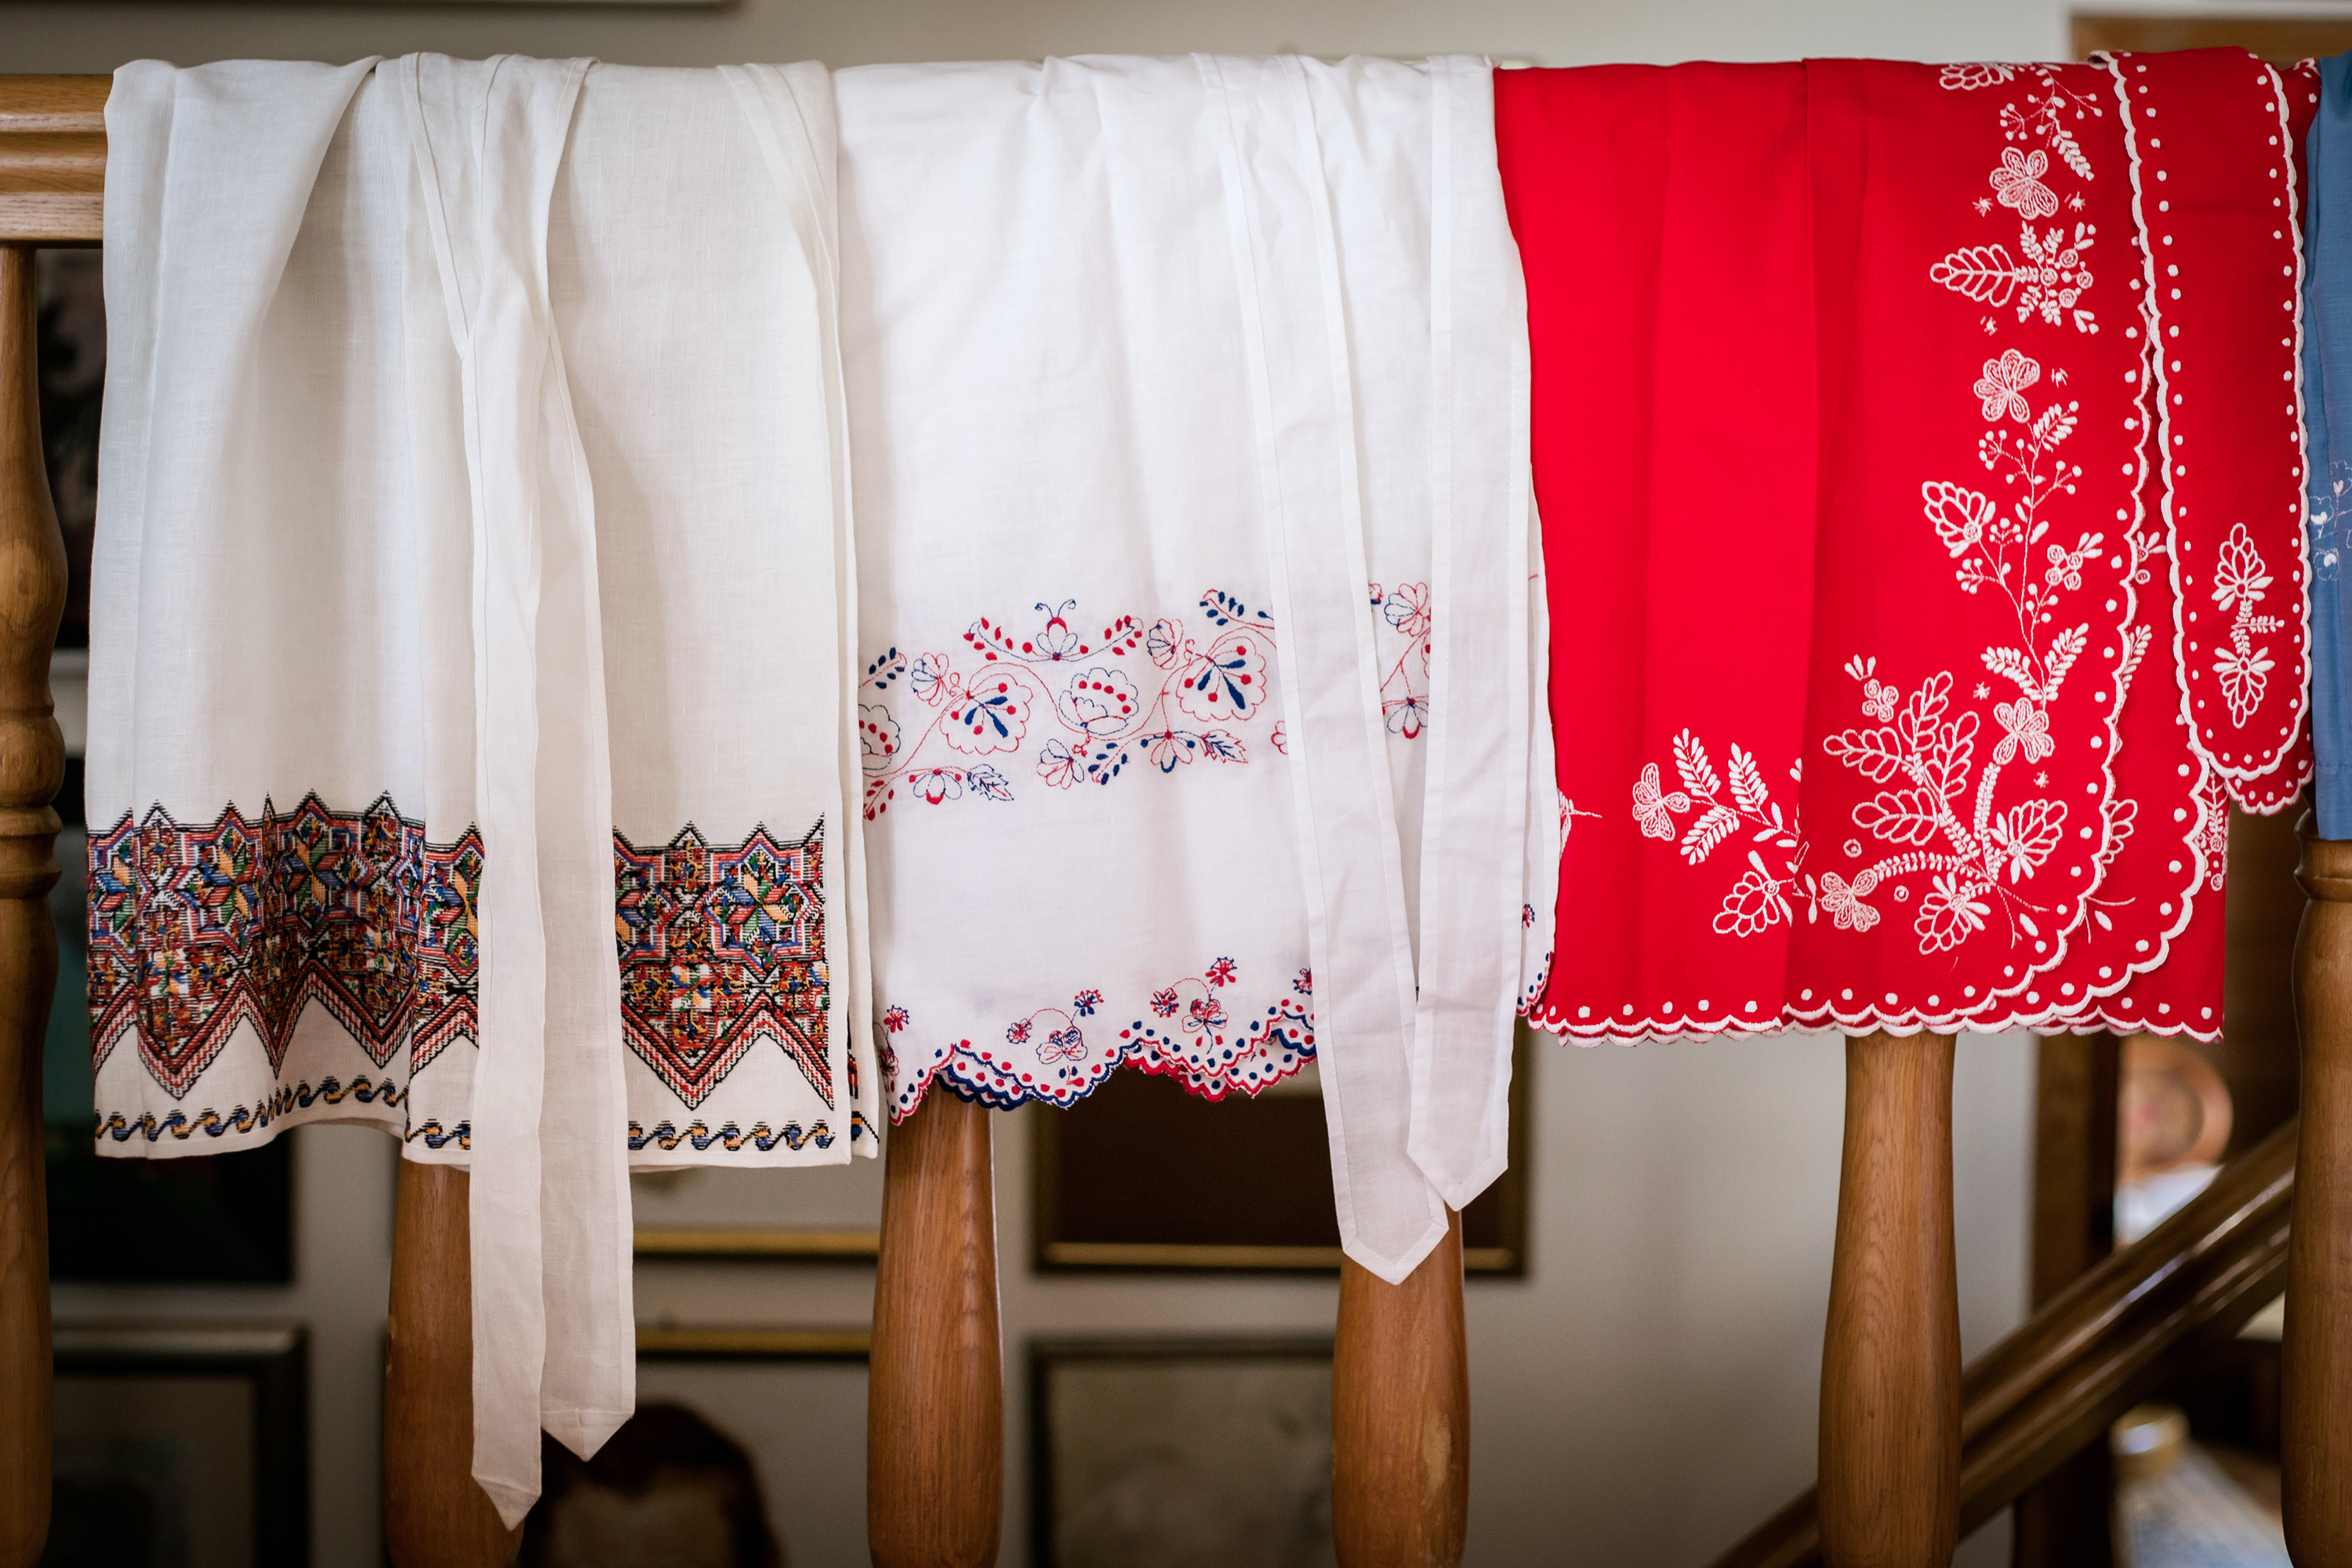 Aprons, from the left: the Lemko embroidery, the Rzeszow embroidery in the middle, the Kuyavia embroidery on the right.